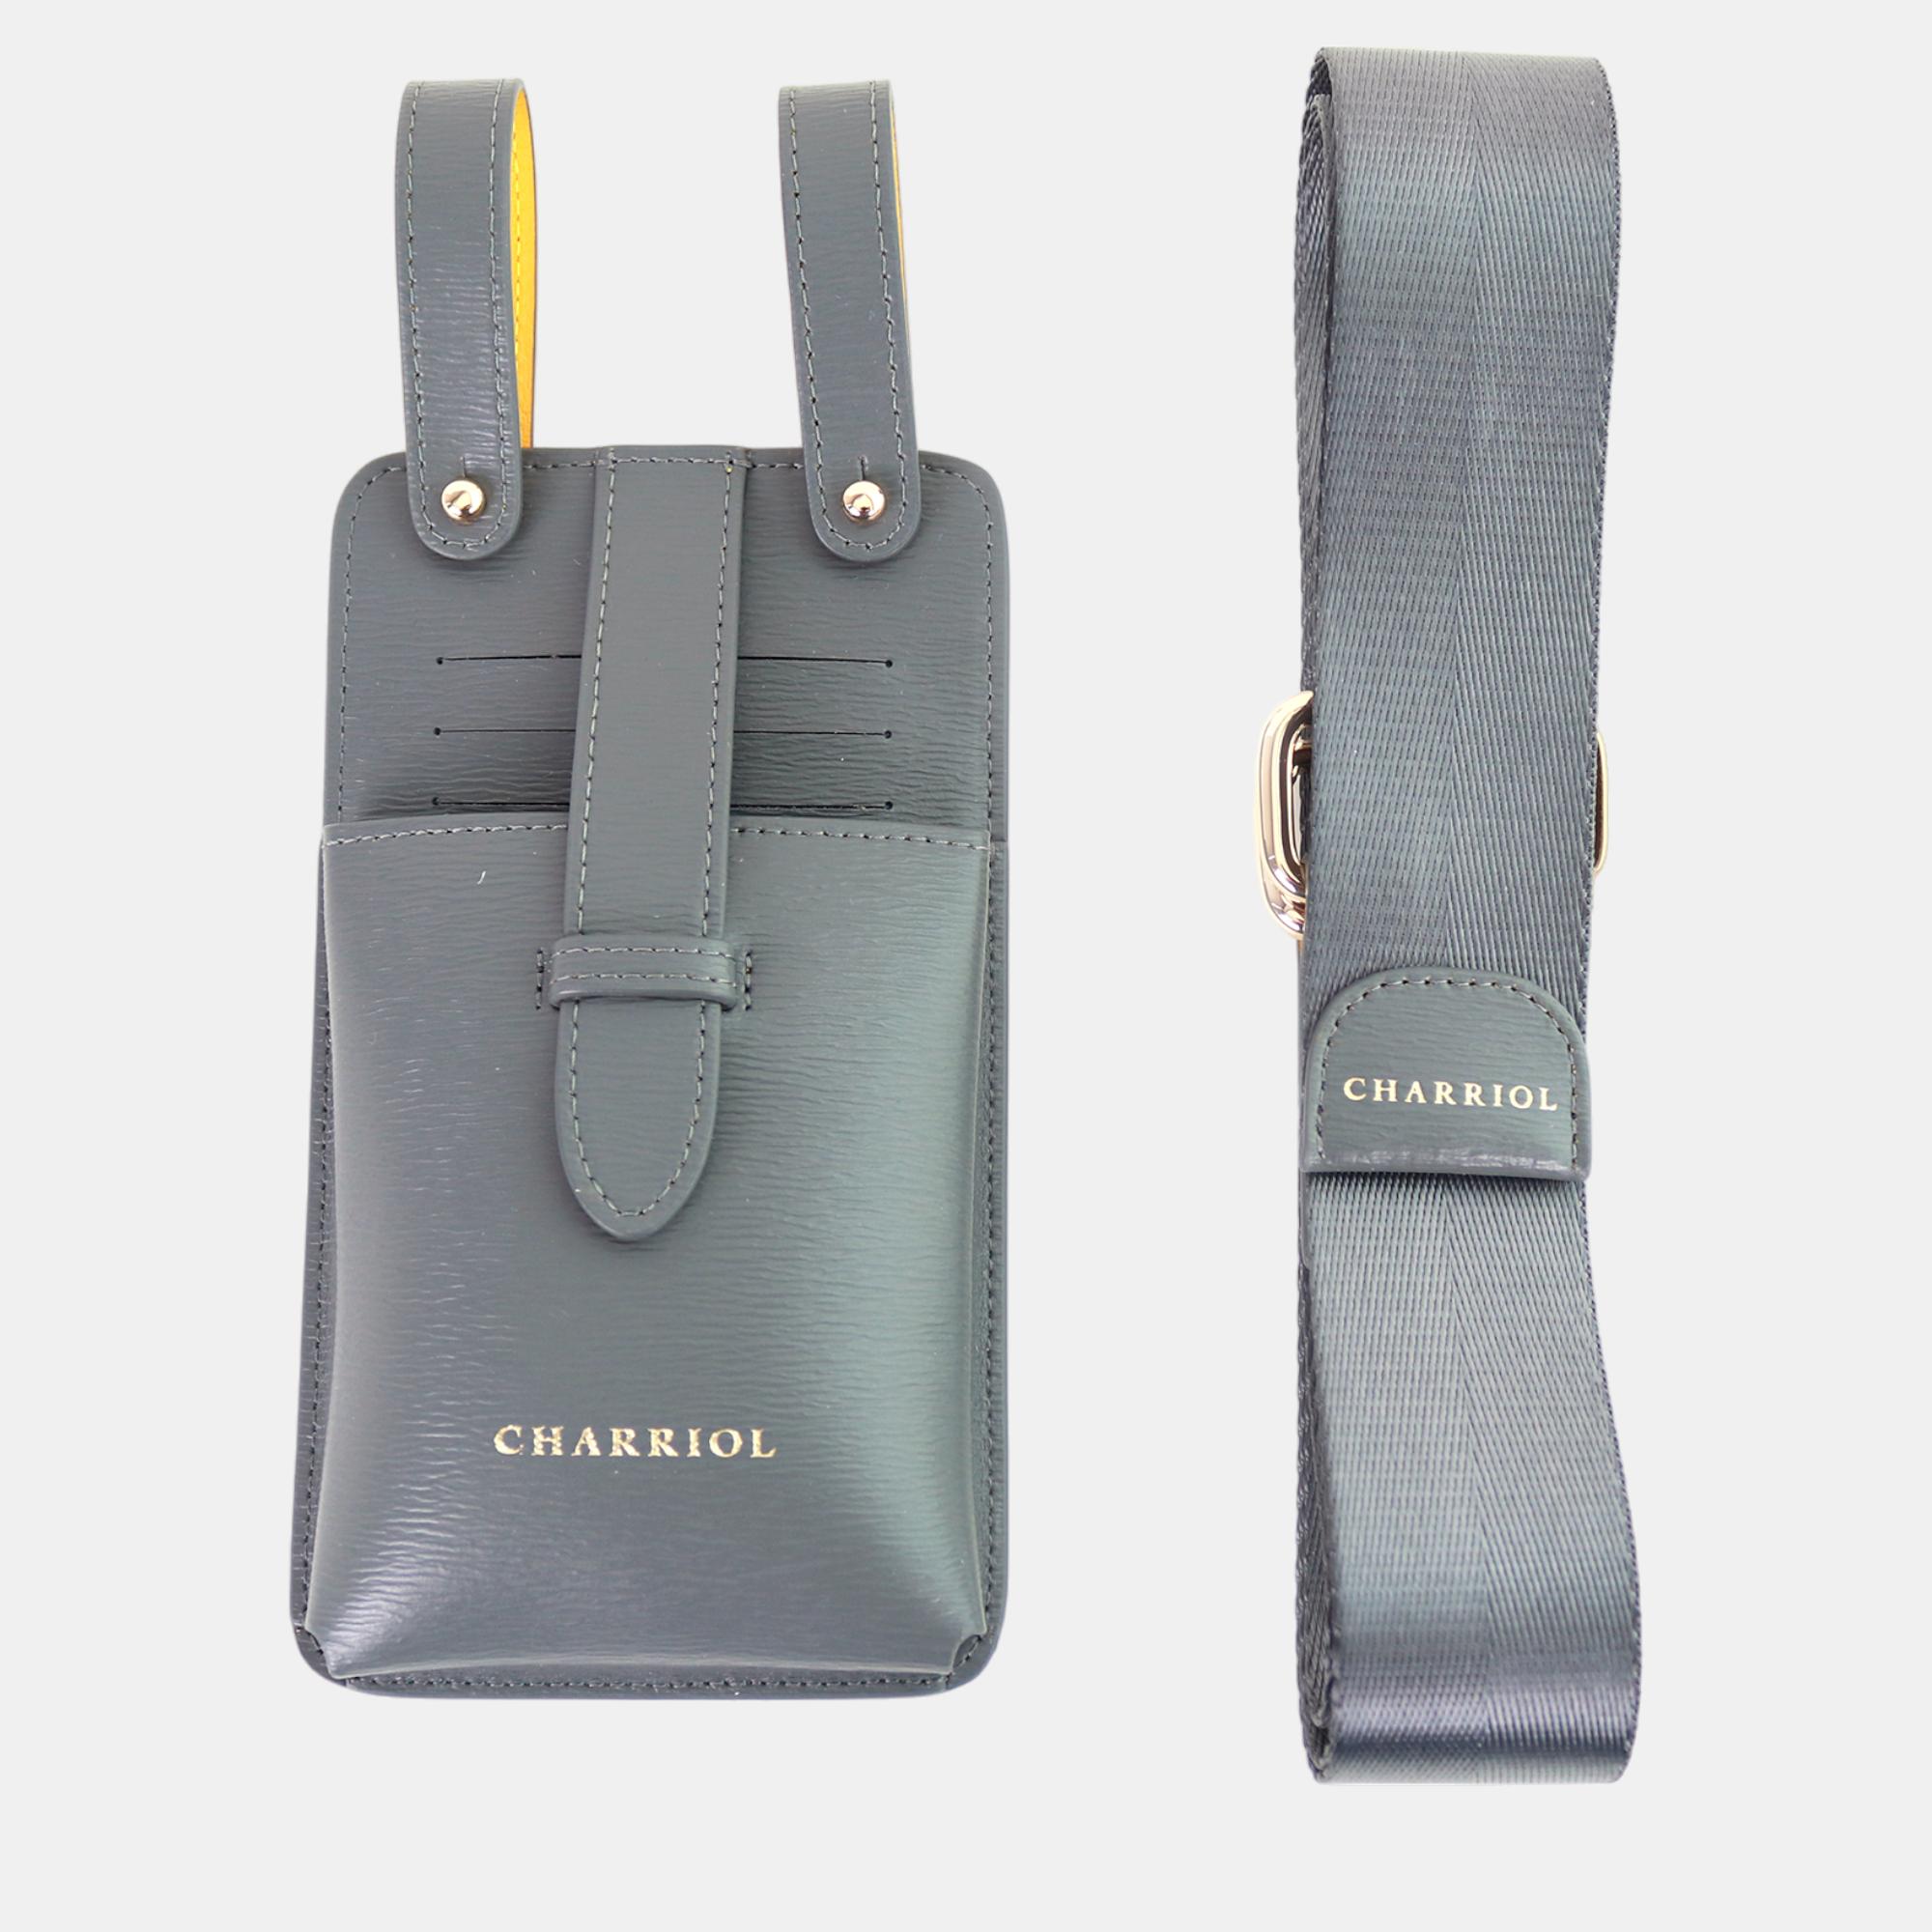 Pre-owned Charriol Grey / Yellow Leather Mobile Accessories